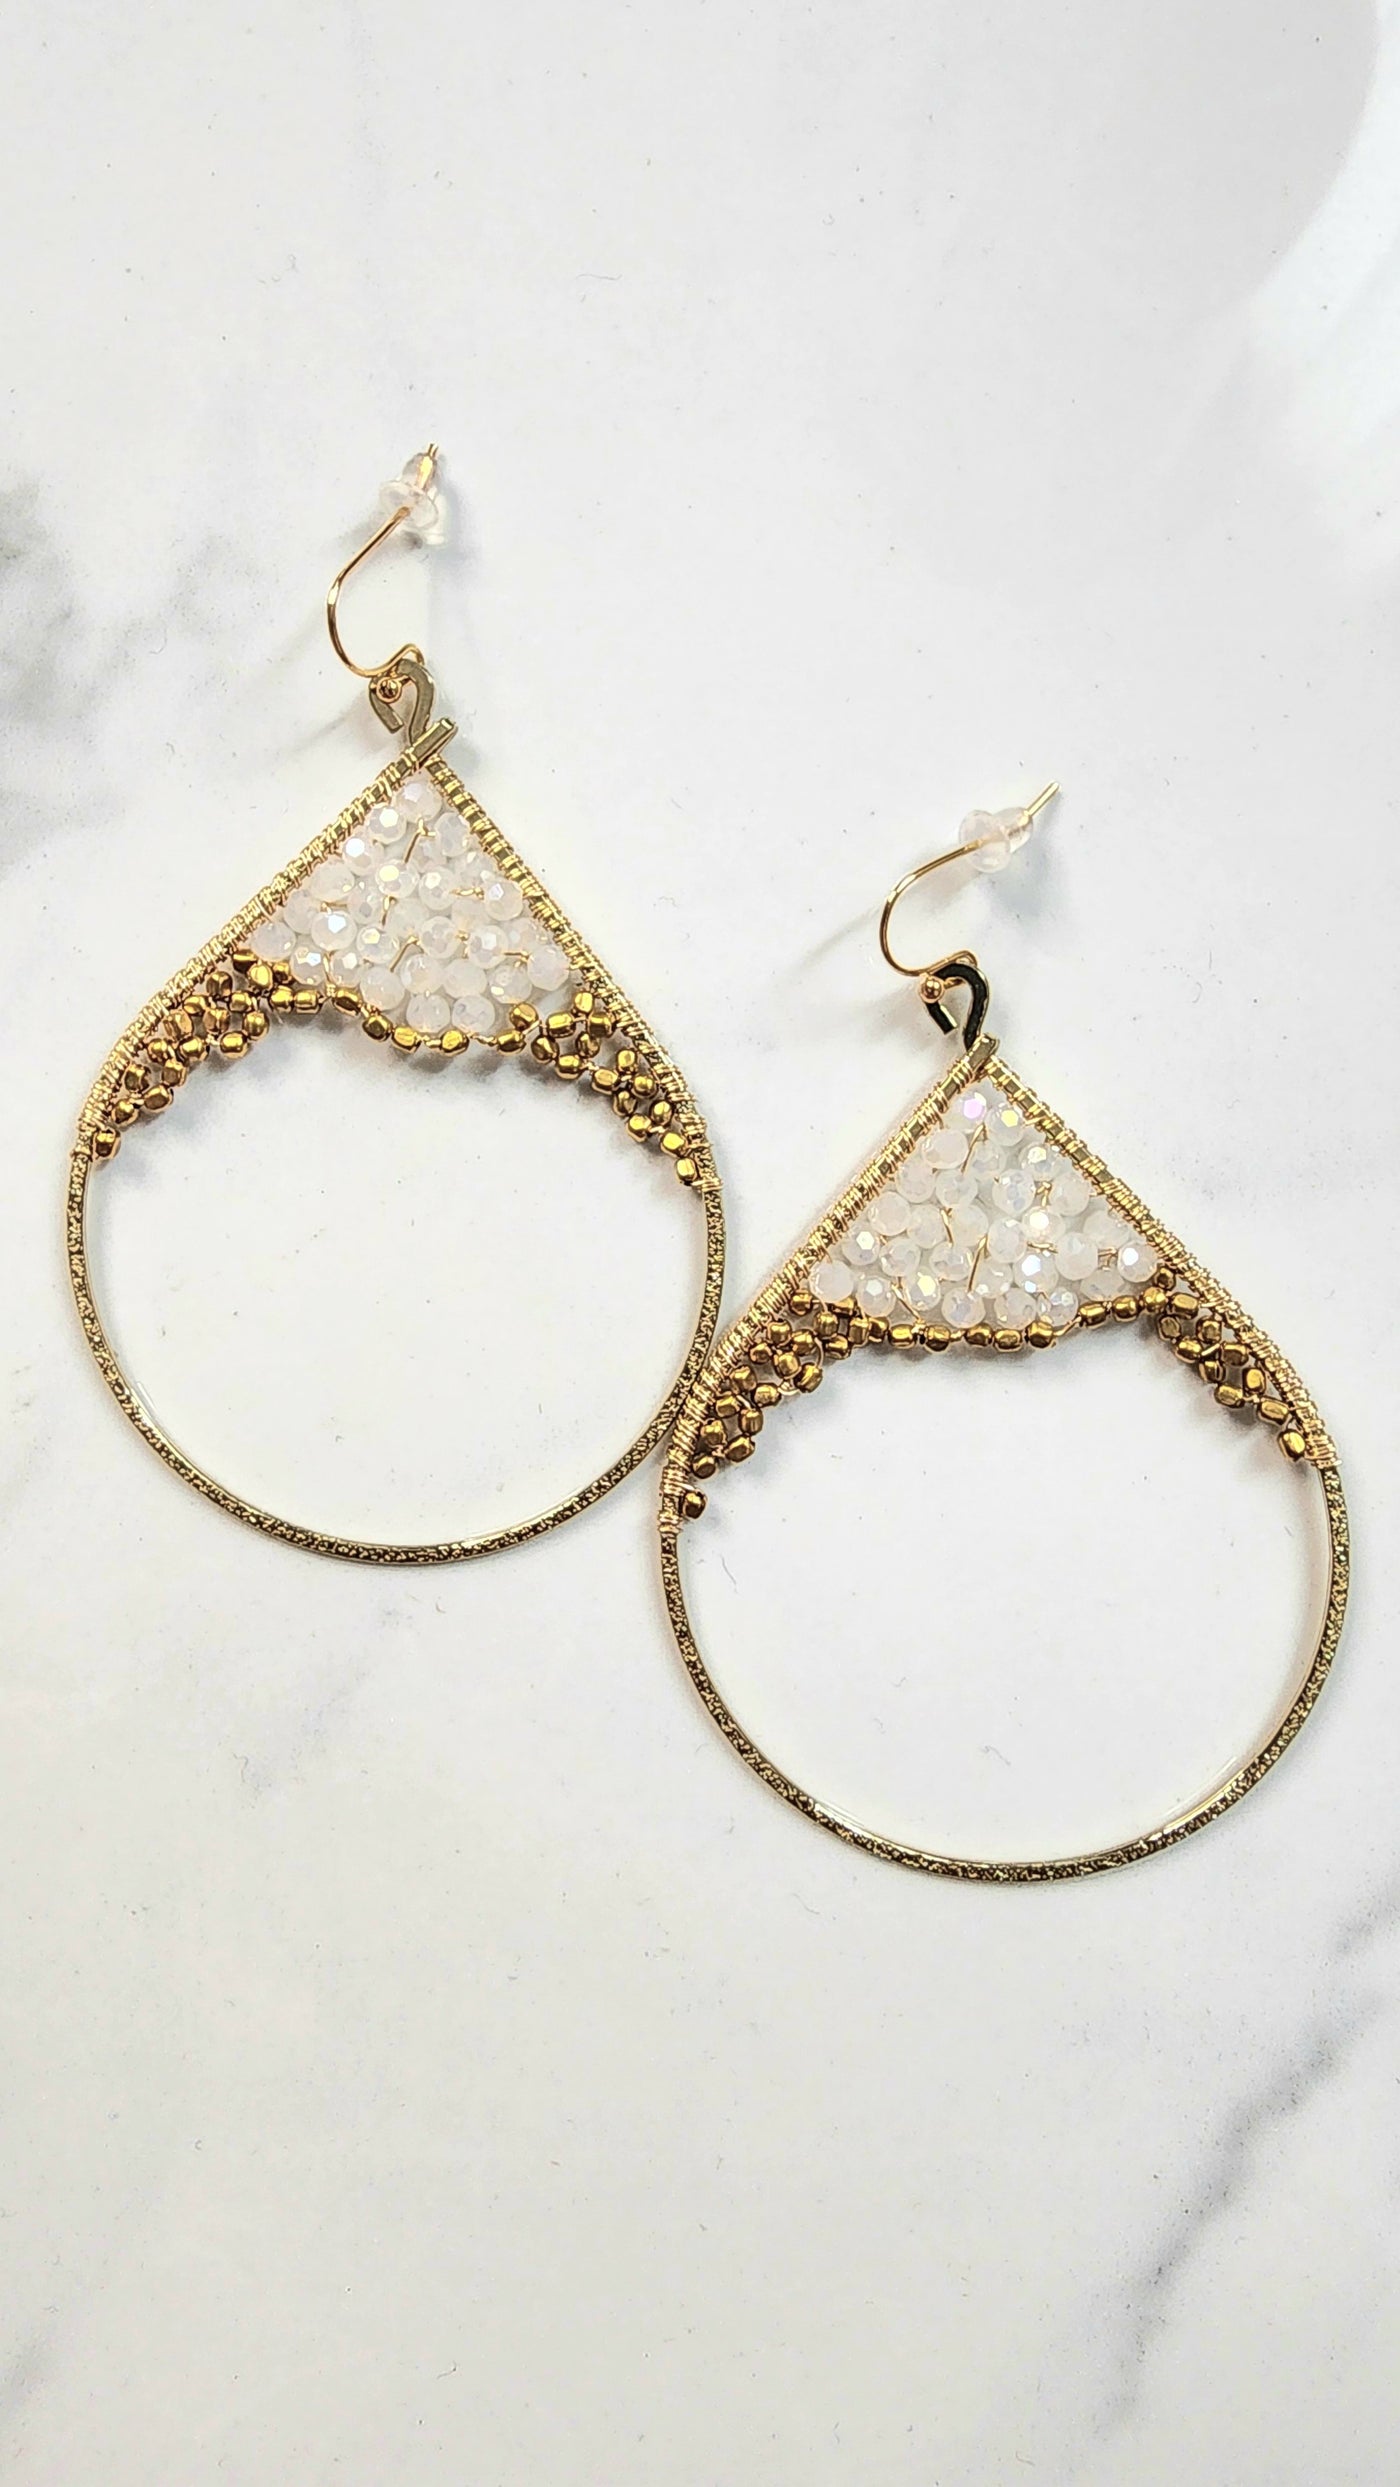 Channing earrings in white/gold